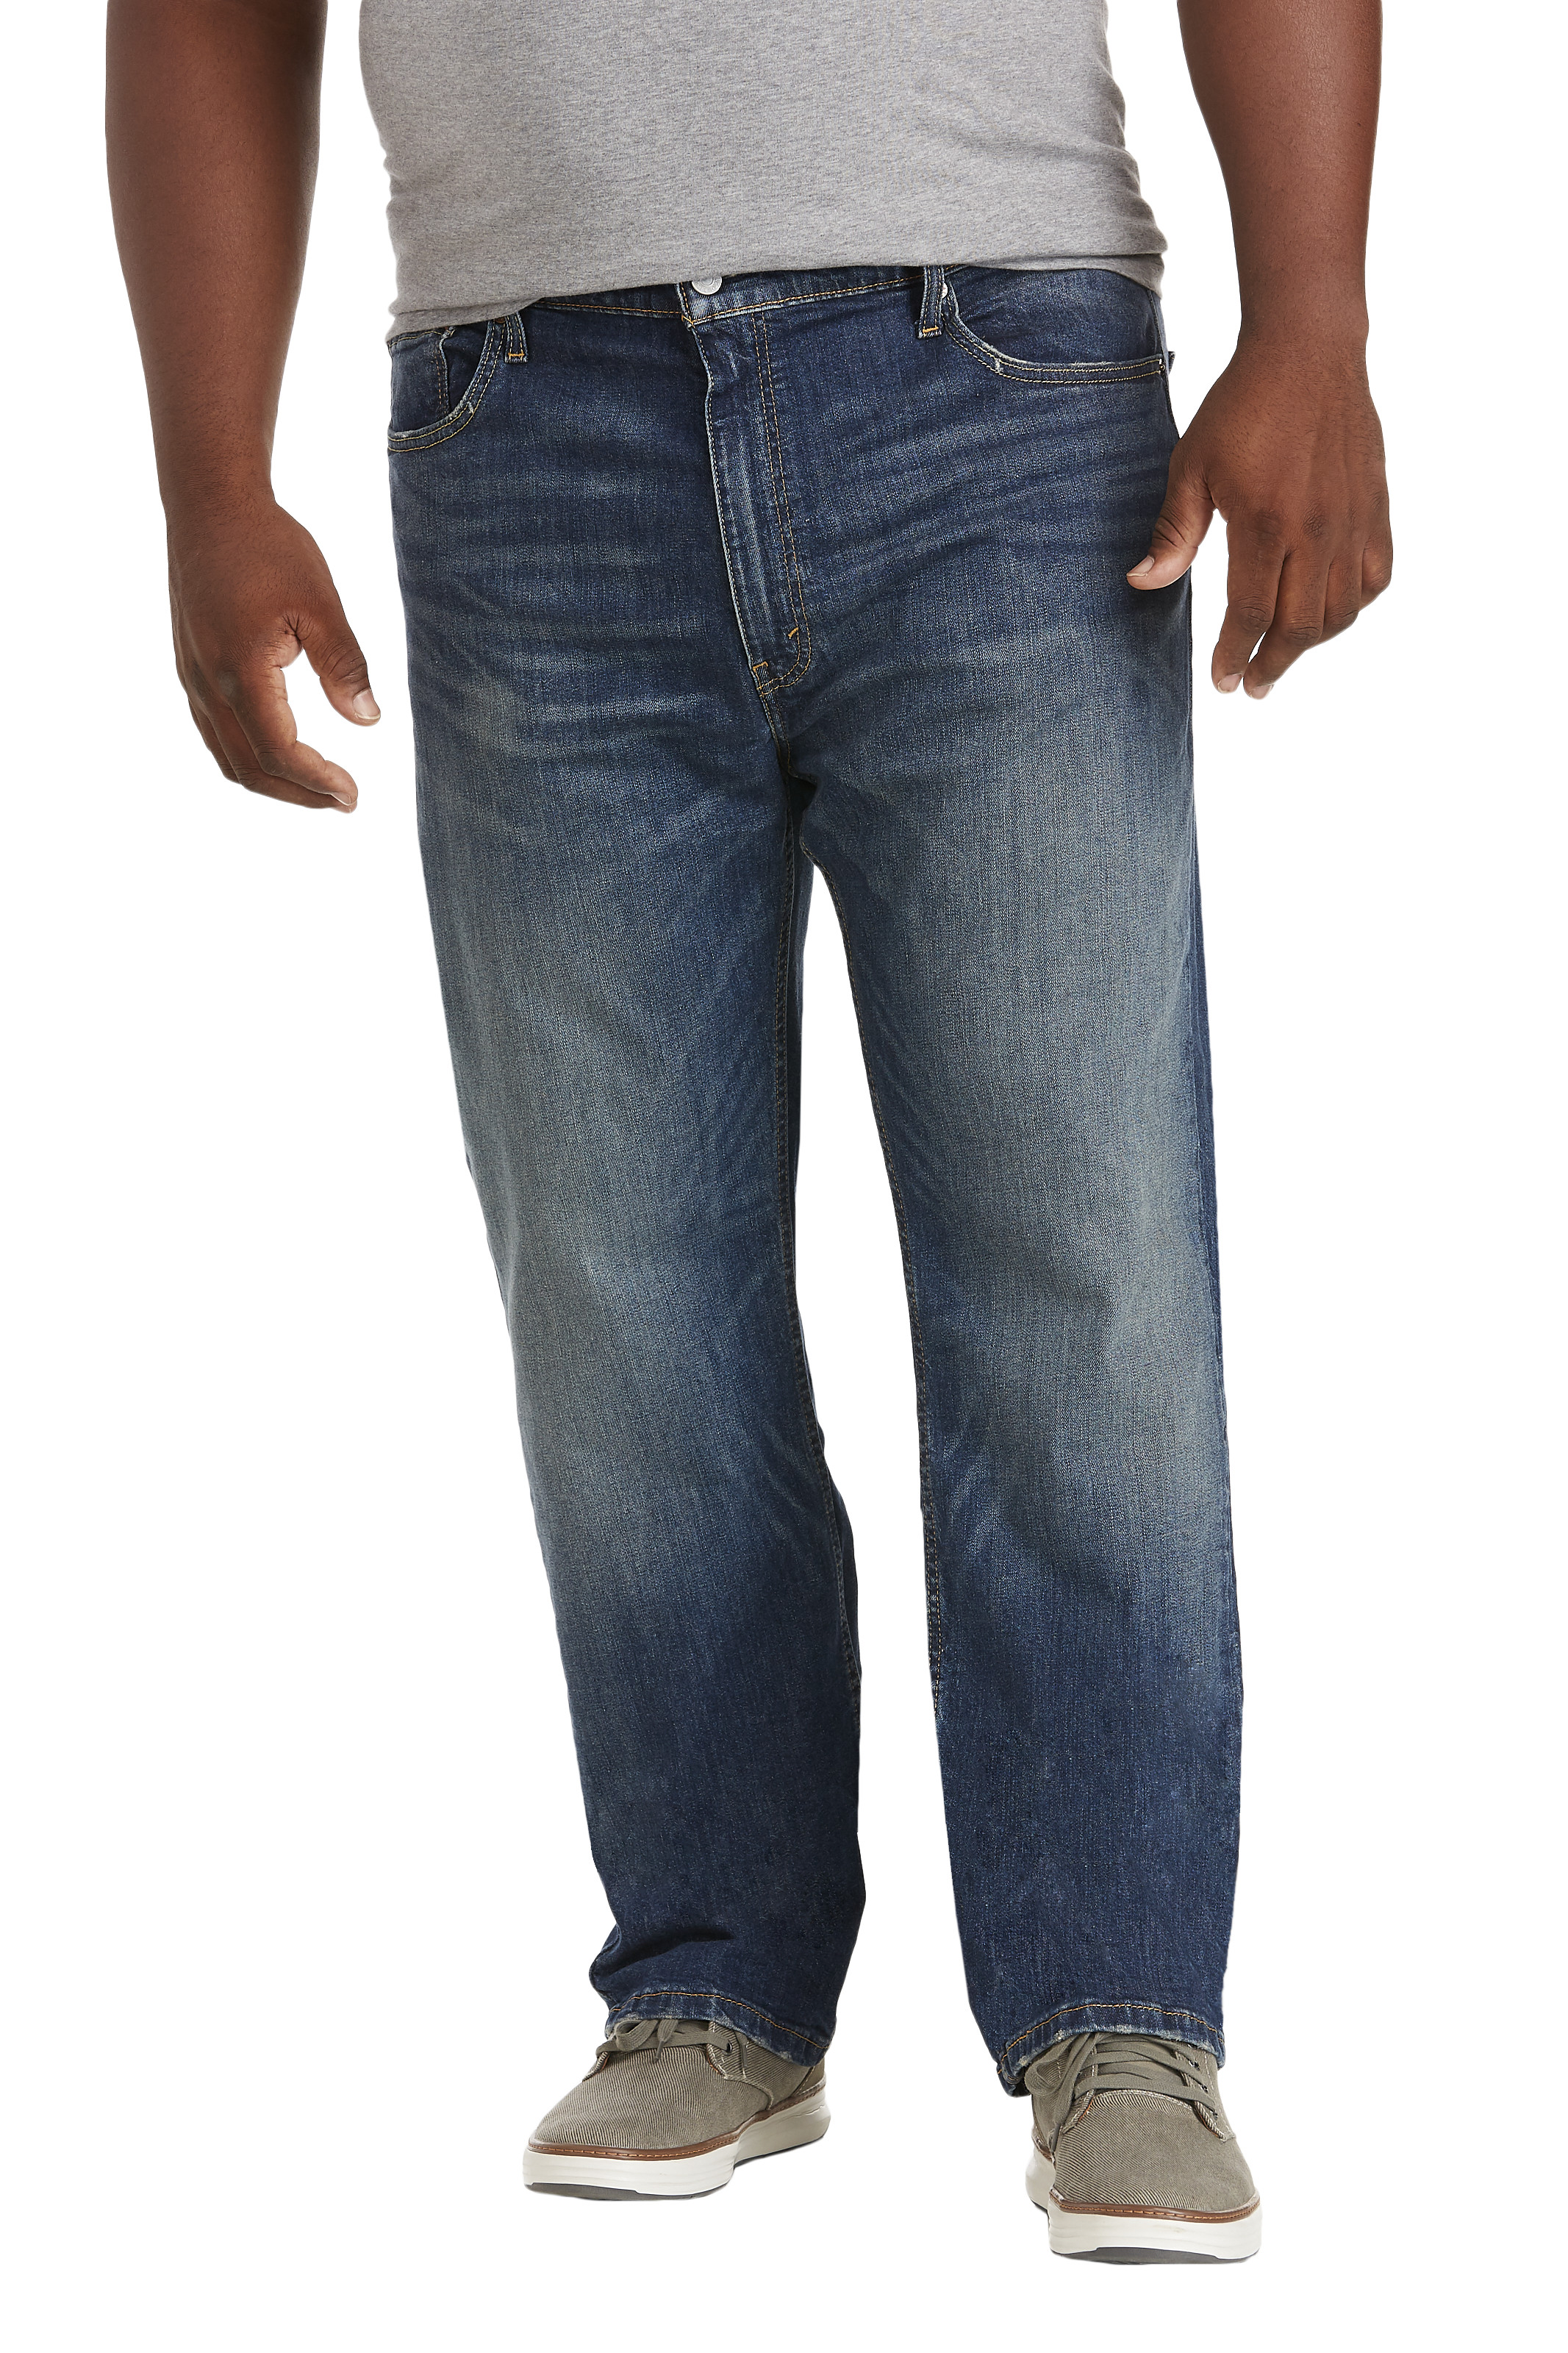 Big + Tall | Levi's 559 Relaxed-Fit Jeans | DXL